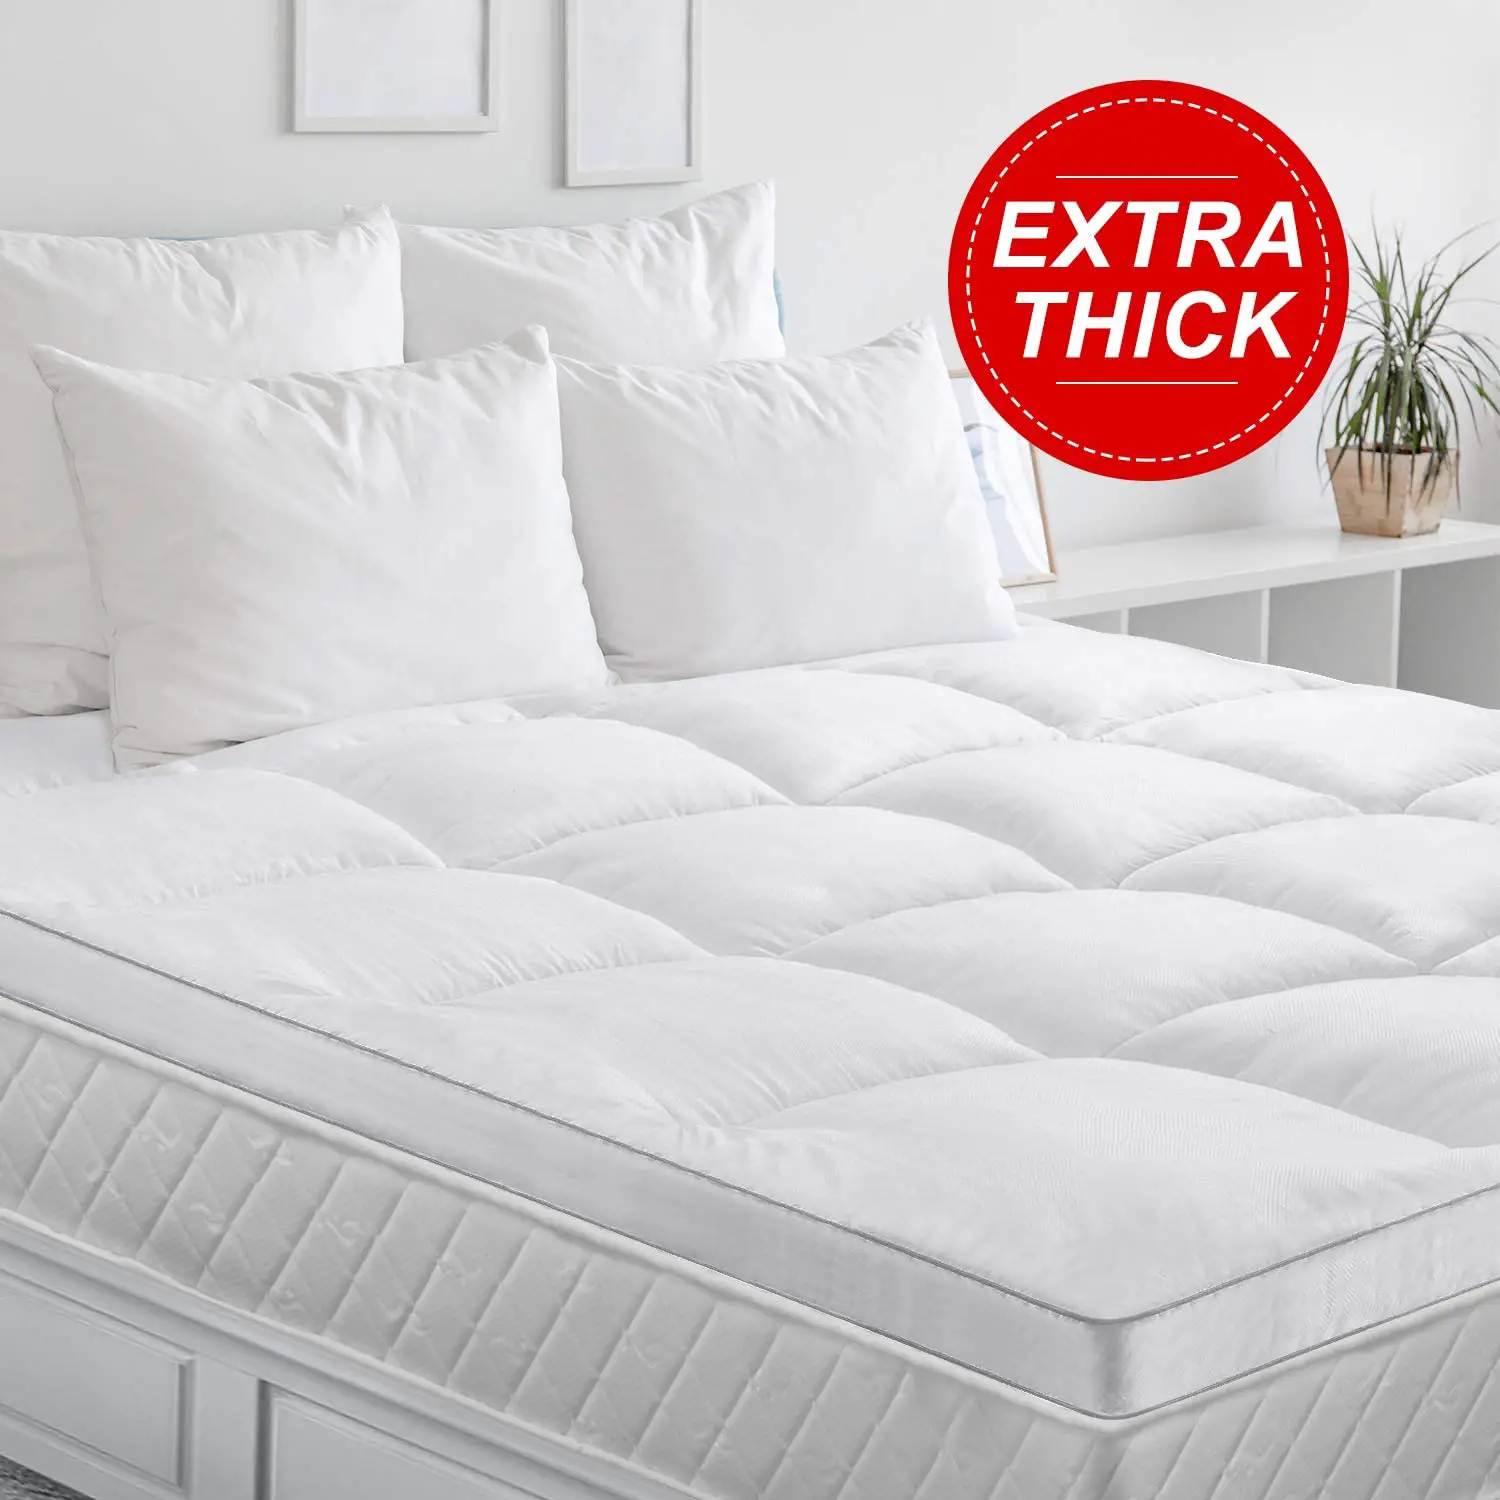 Amazon.com: BedStory Extra Thick Mattress Topper 2.5inch Full Size ...